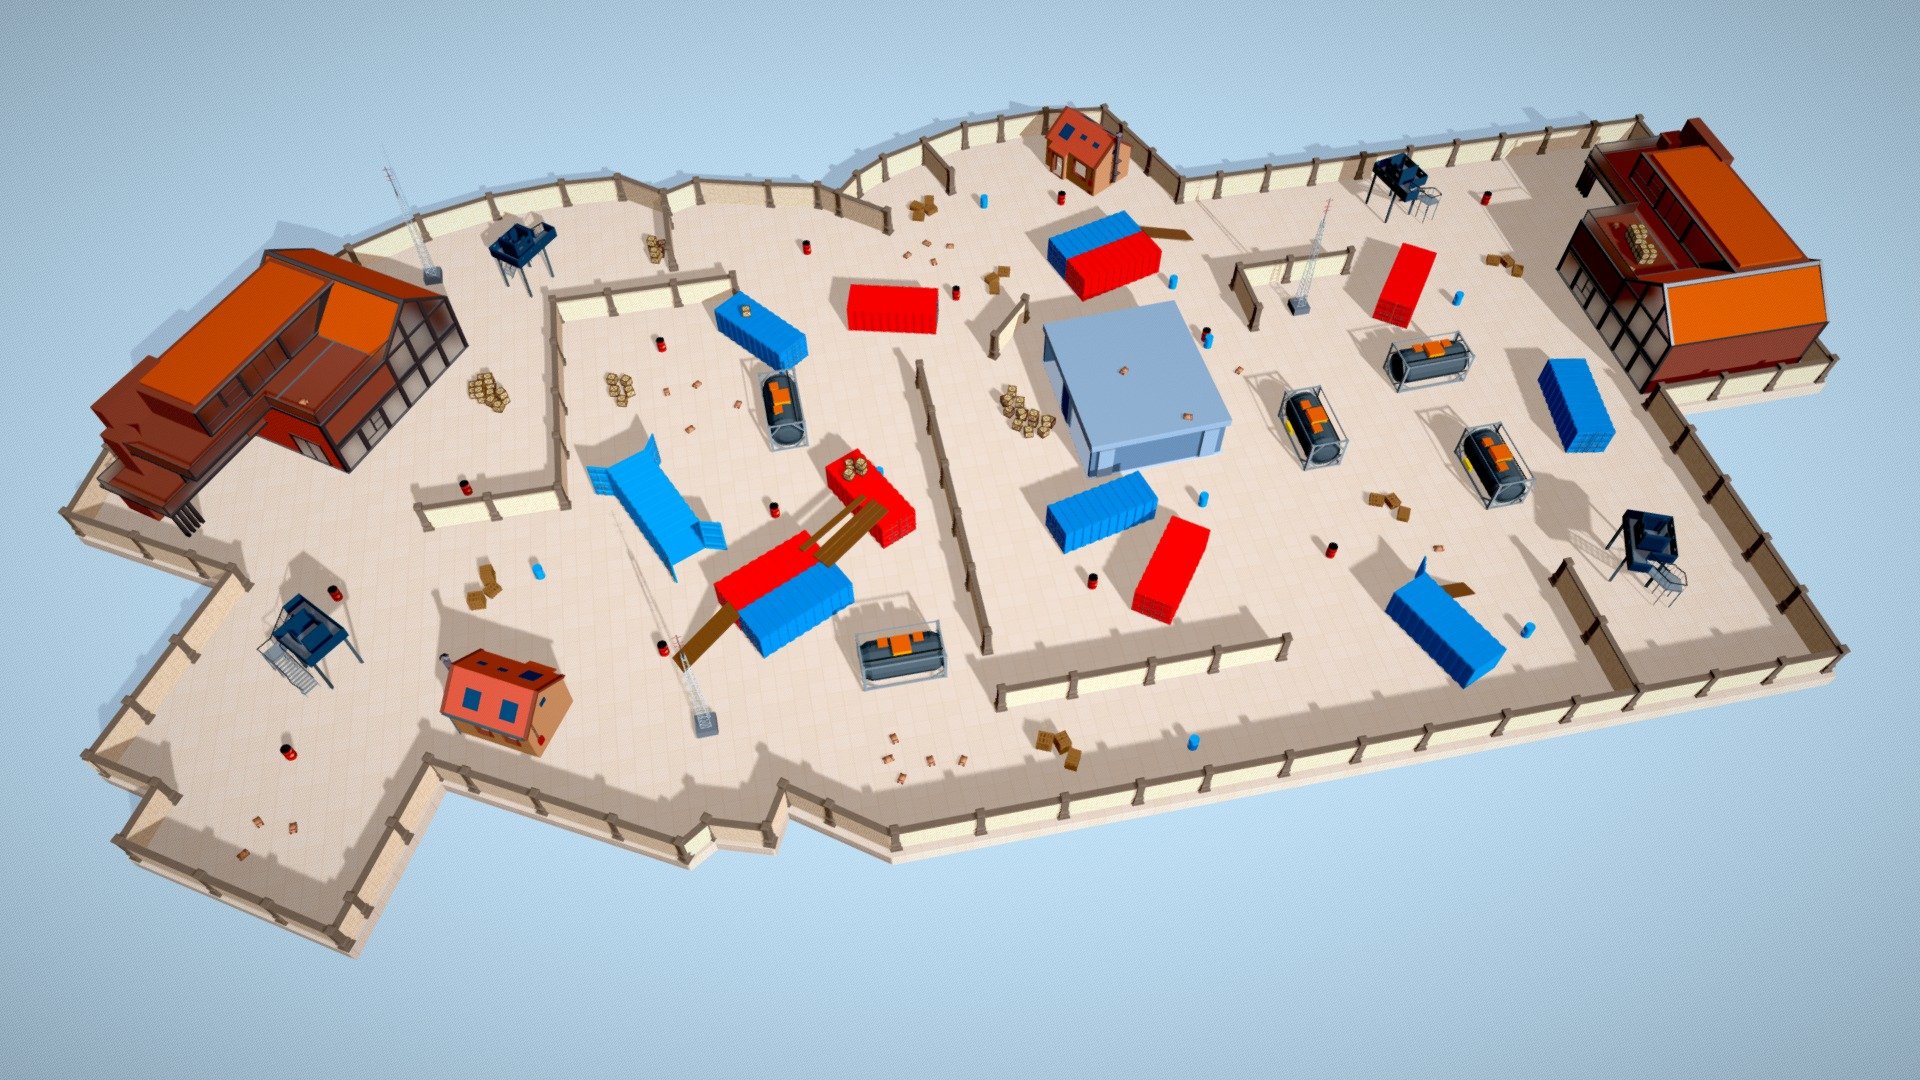 This TDM map area includes very useful assets which can be used for FPS games. 
It includes various things like Boileras, Weapons, Guns, Drums, Barrels, Wooden Boxes, Ware House, garages, Containers, Chemical barrels, Explosive TNT Boxes, etc with very nice wall boundaries. 
All the models are low-poly models and were originally modeled in Blender. 
The original Zip File includes the following file formats: Obj, Glb, and Blend. 

Enjoy this environment map pack for your various usages like showcasing the area, Various games, Rendering, or whatever you want. 
Leave valuable feedback in the comments section below. Thank you 3d model